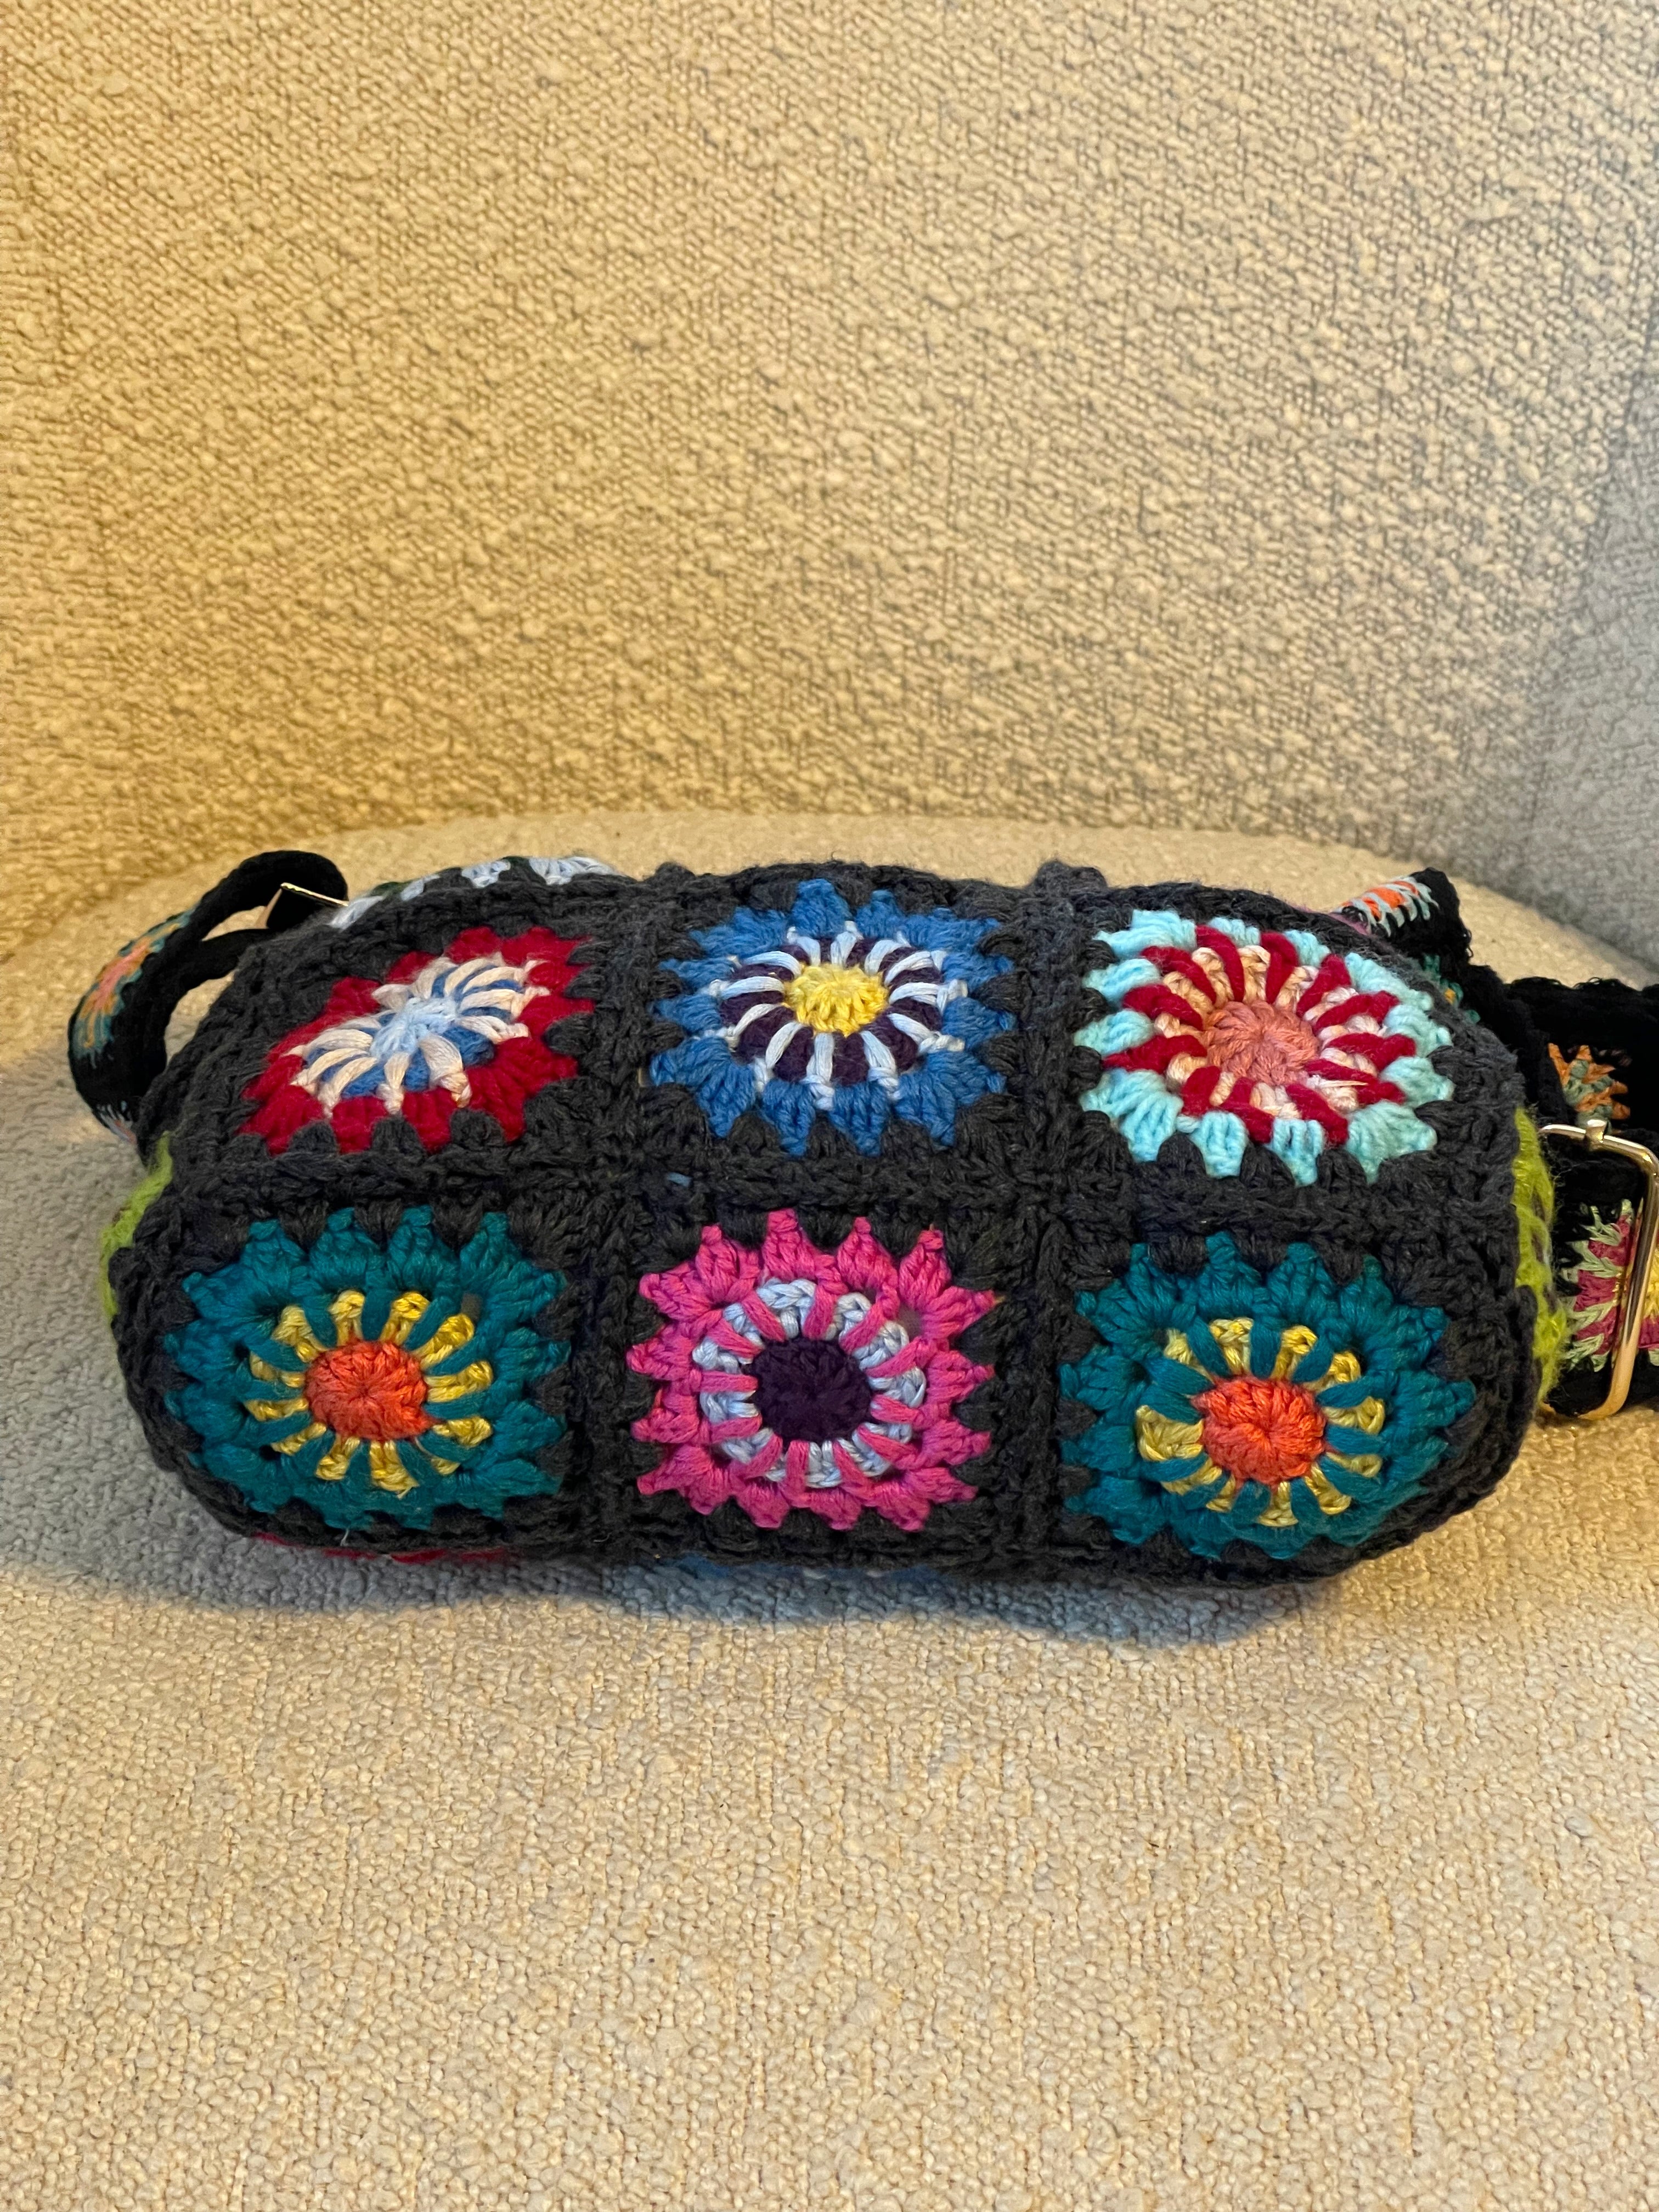 GOLDxTEAL stunning crochet knitted clutch with crochet detachable strap.